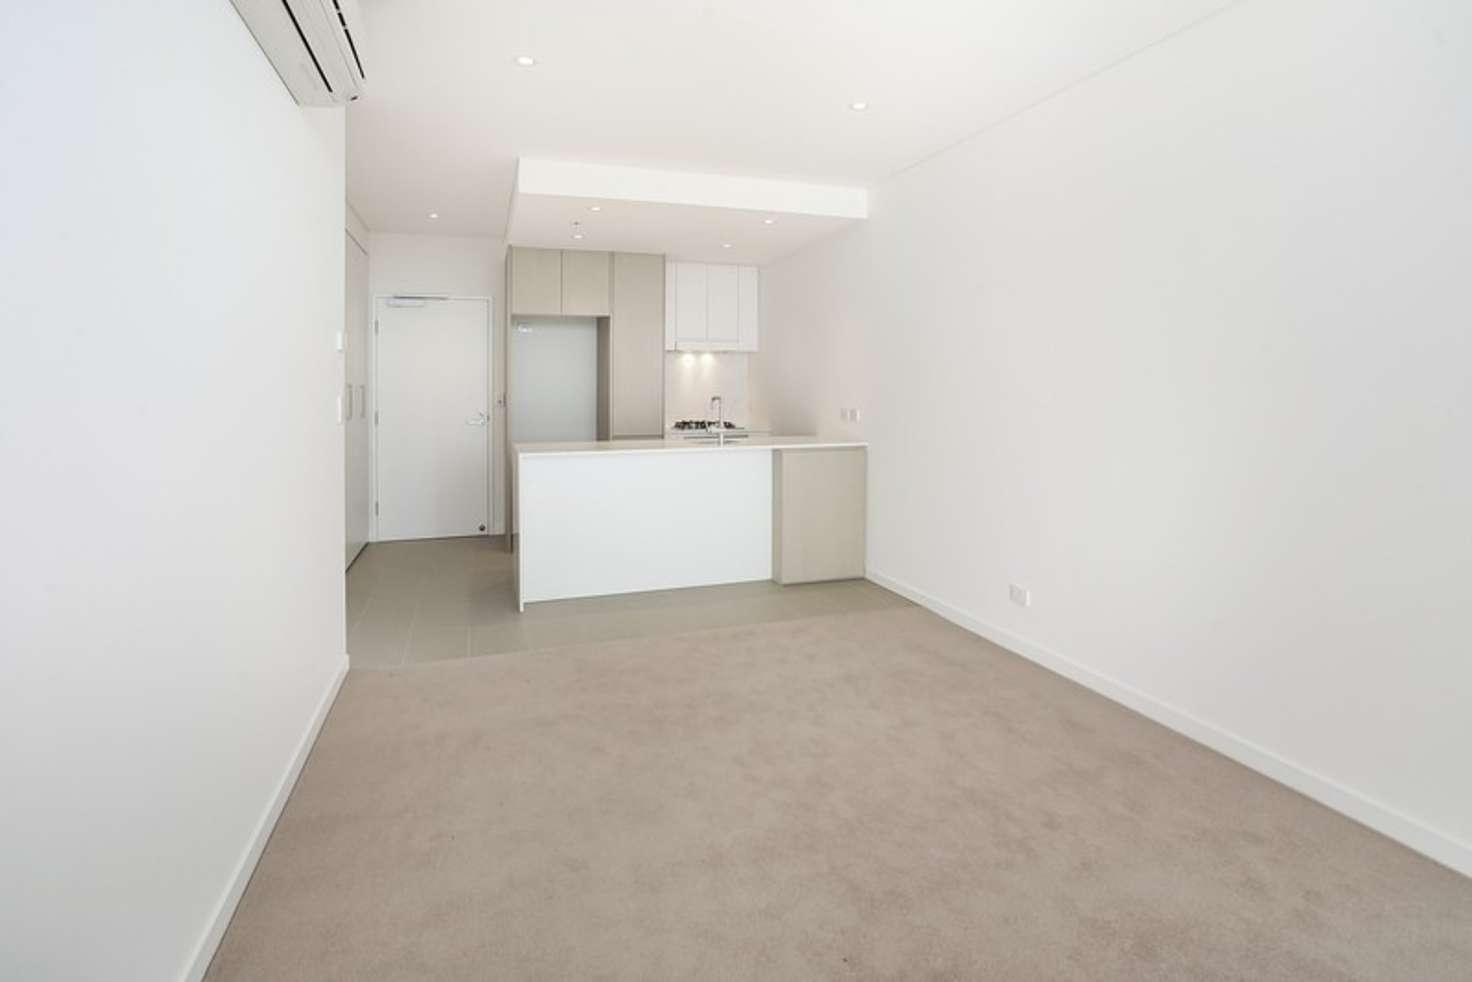 Main view of Homely apartment listing, 214/320 MacArthur Ave, Hamilton QLD 4007